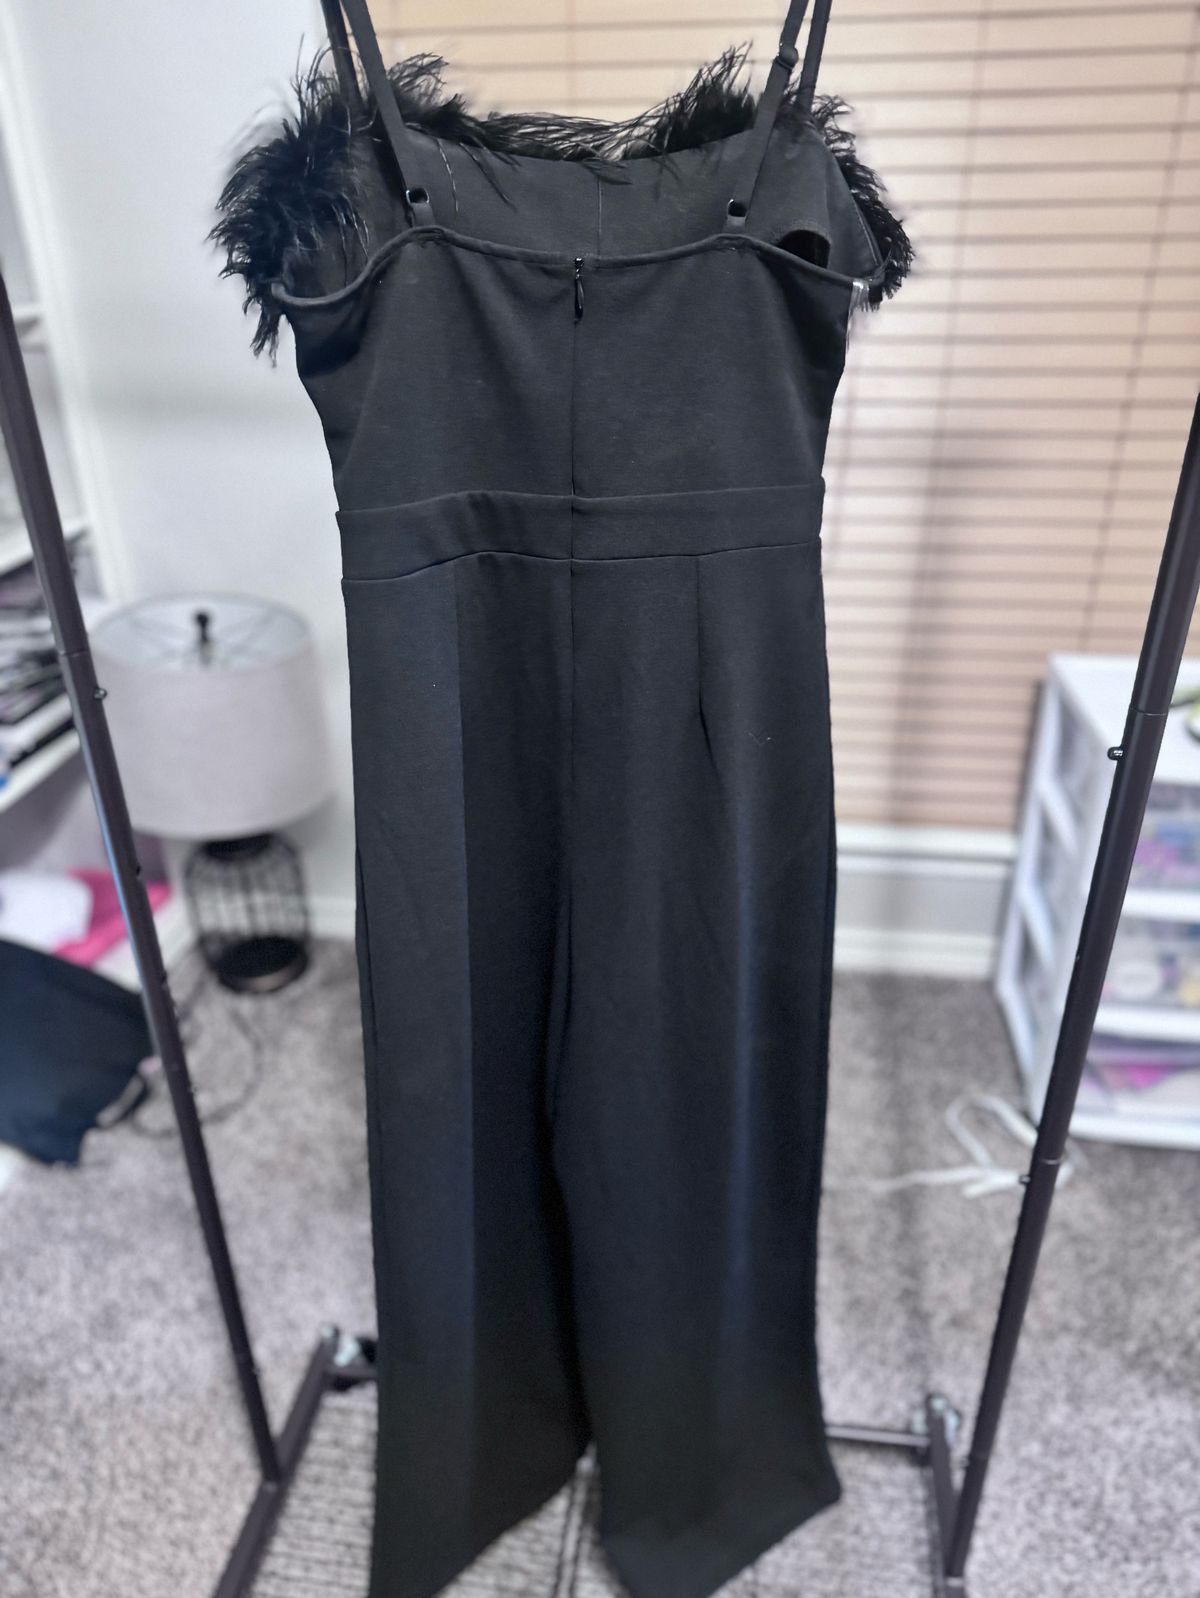 Size 2 Black Formal Jumpsuit on Queenly